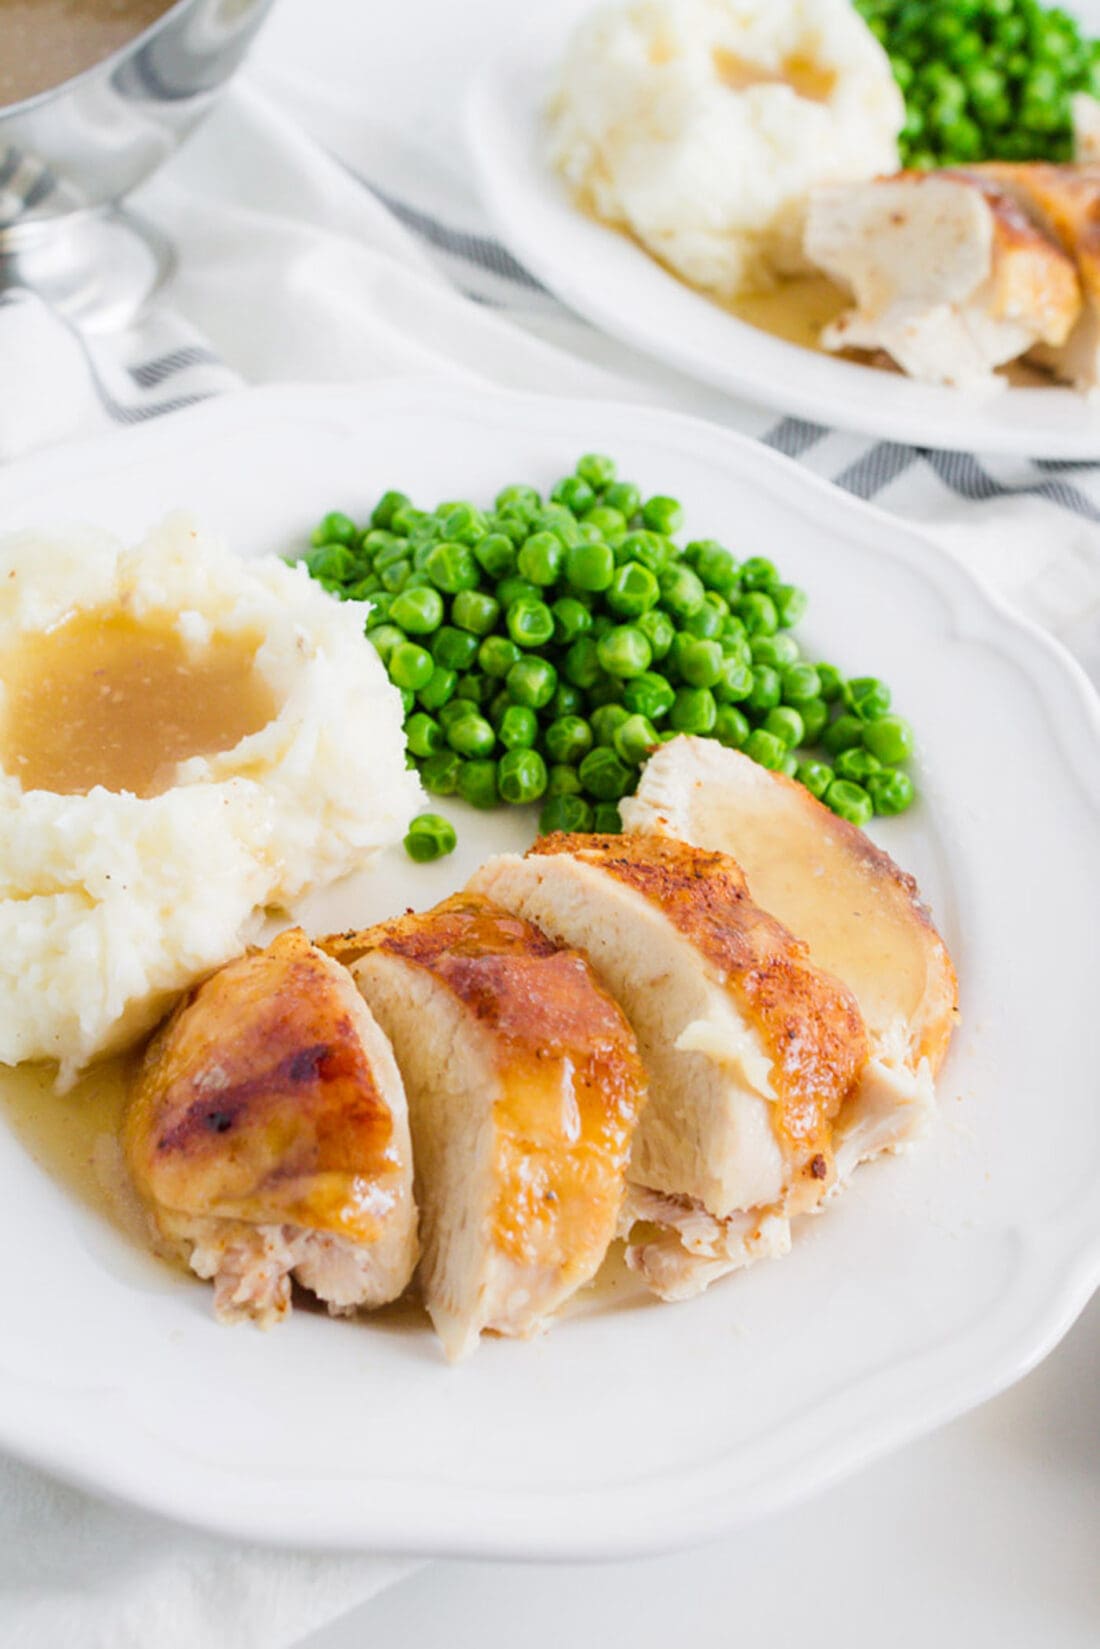 Crockpot Sticky Chicken on a plate with peas and mashed potatoes